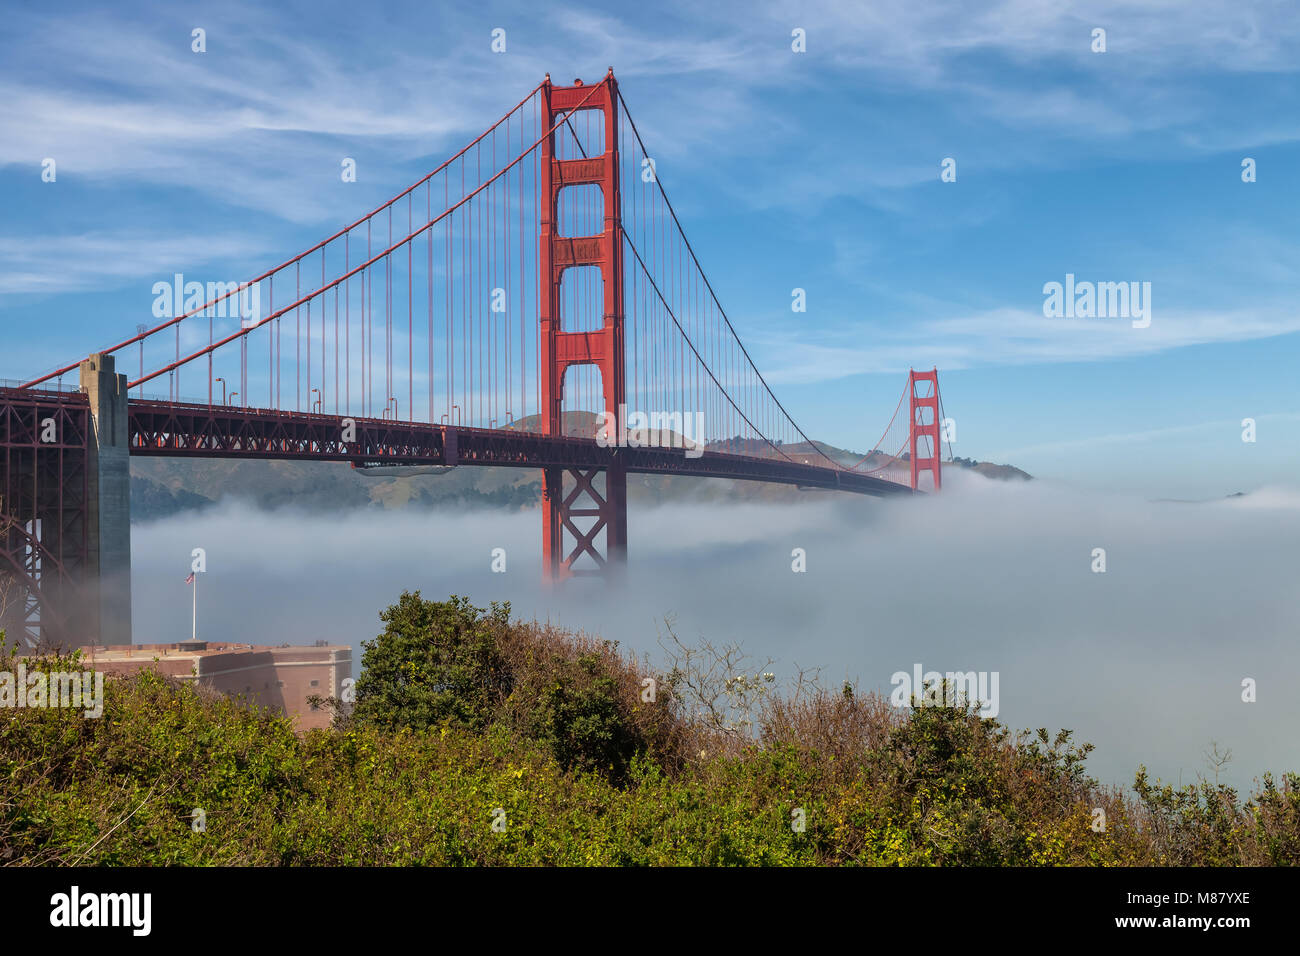 The iconic Golden Gate Bridge, with low fog under the bridge, on an early spring morning, San Francisco, California, United States. Stock Photo